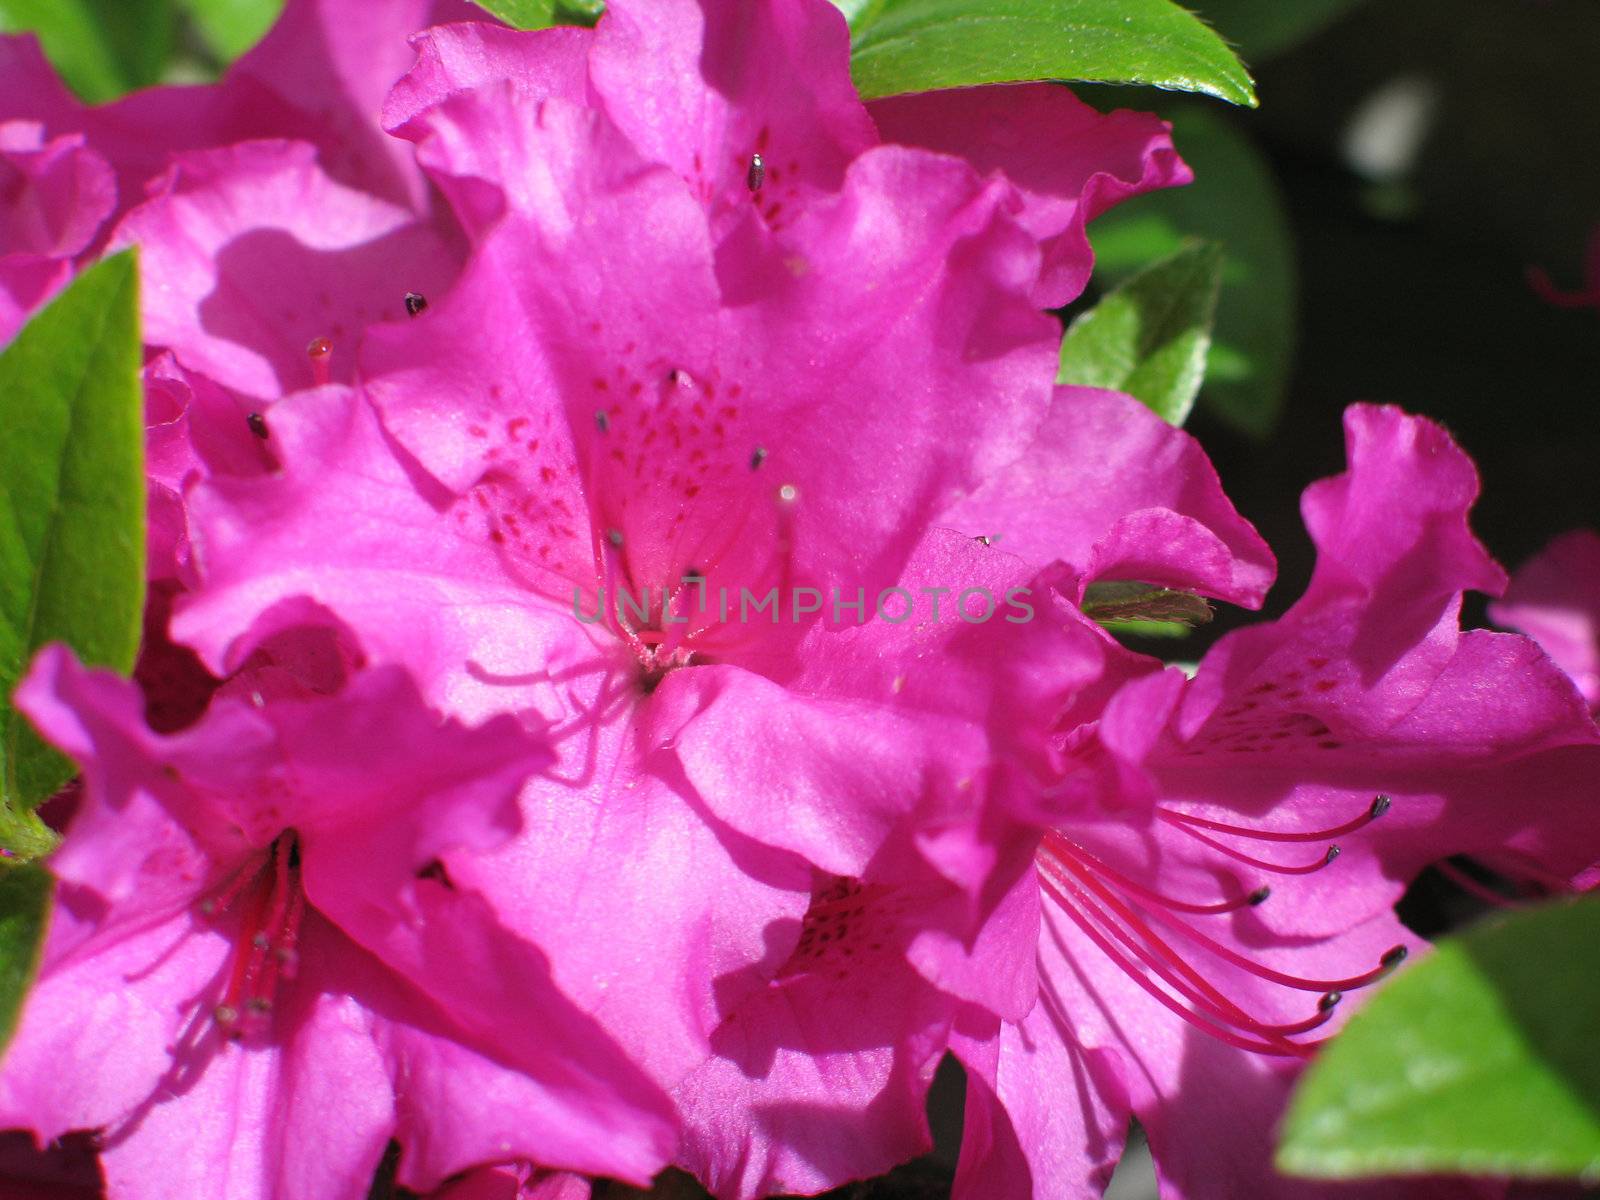 magenta rhododendron bush in bloom by mmm